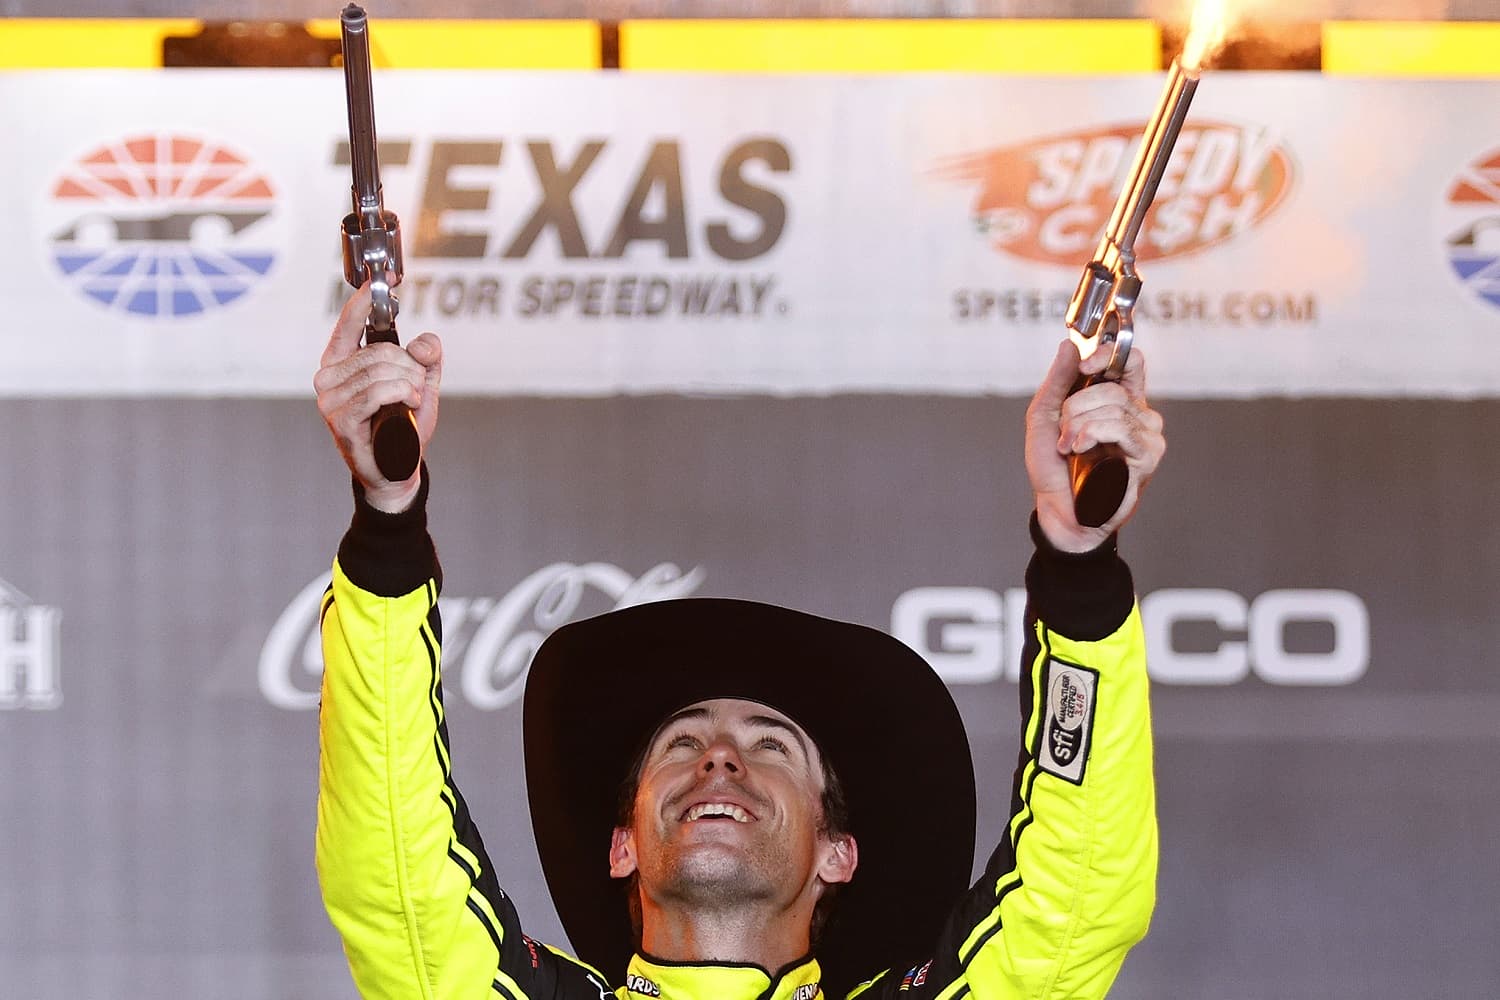 Ryan Blaney celebrates by shooting guns in Victory Lane after winning the NASCAR Cup Series All-Star Race at Texas Motor Speedway on May 22, 2022. | Chris Graythen/Getty Images